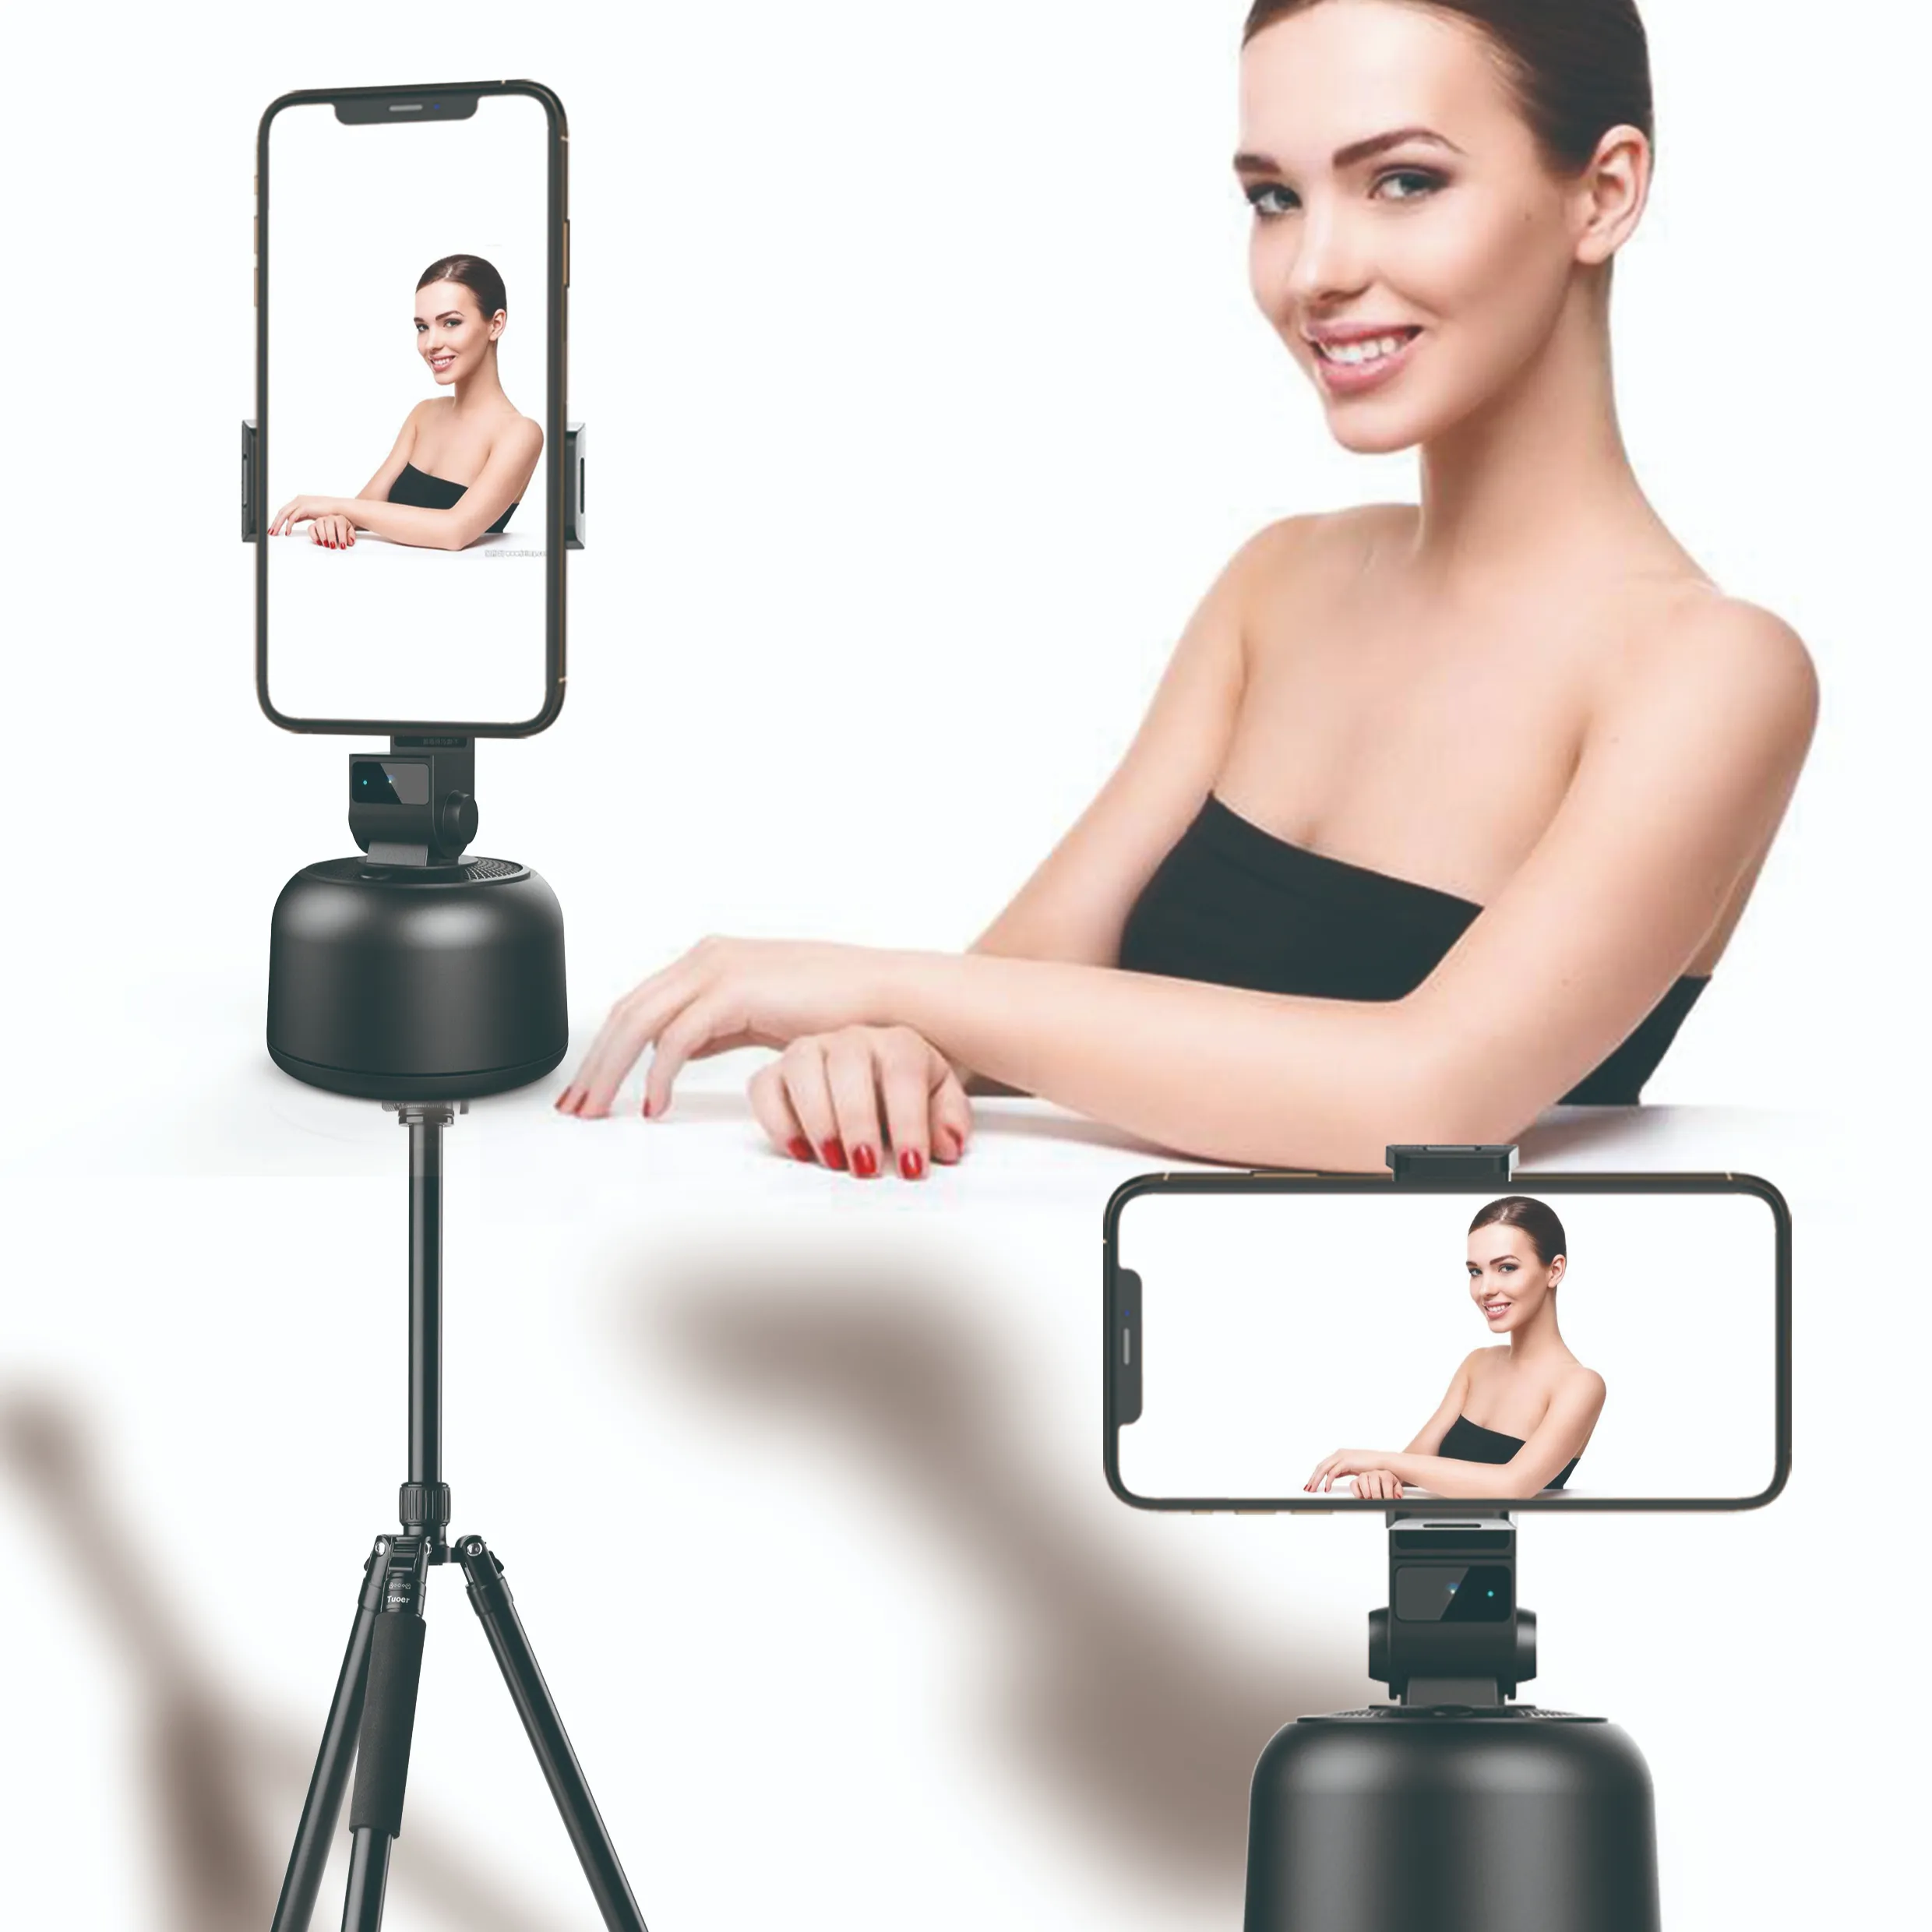 Built-in Camera Face Tracking Phone Gimbal Stabilizers